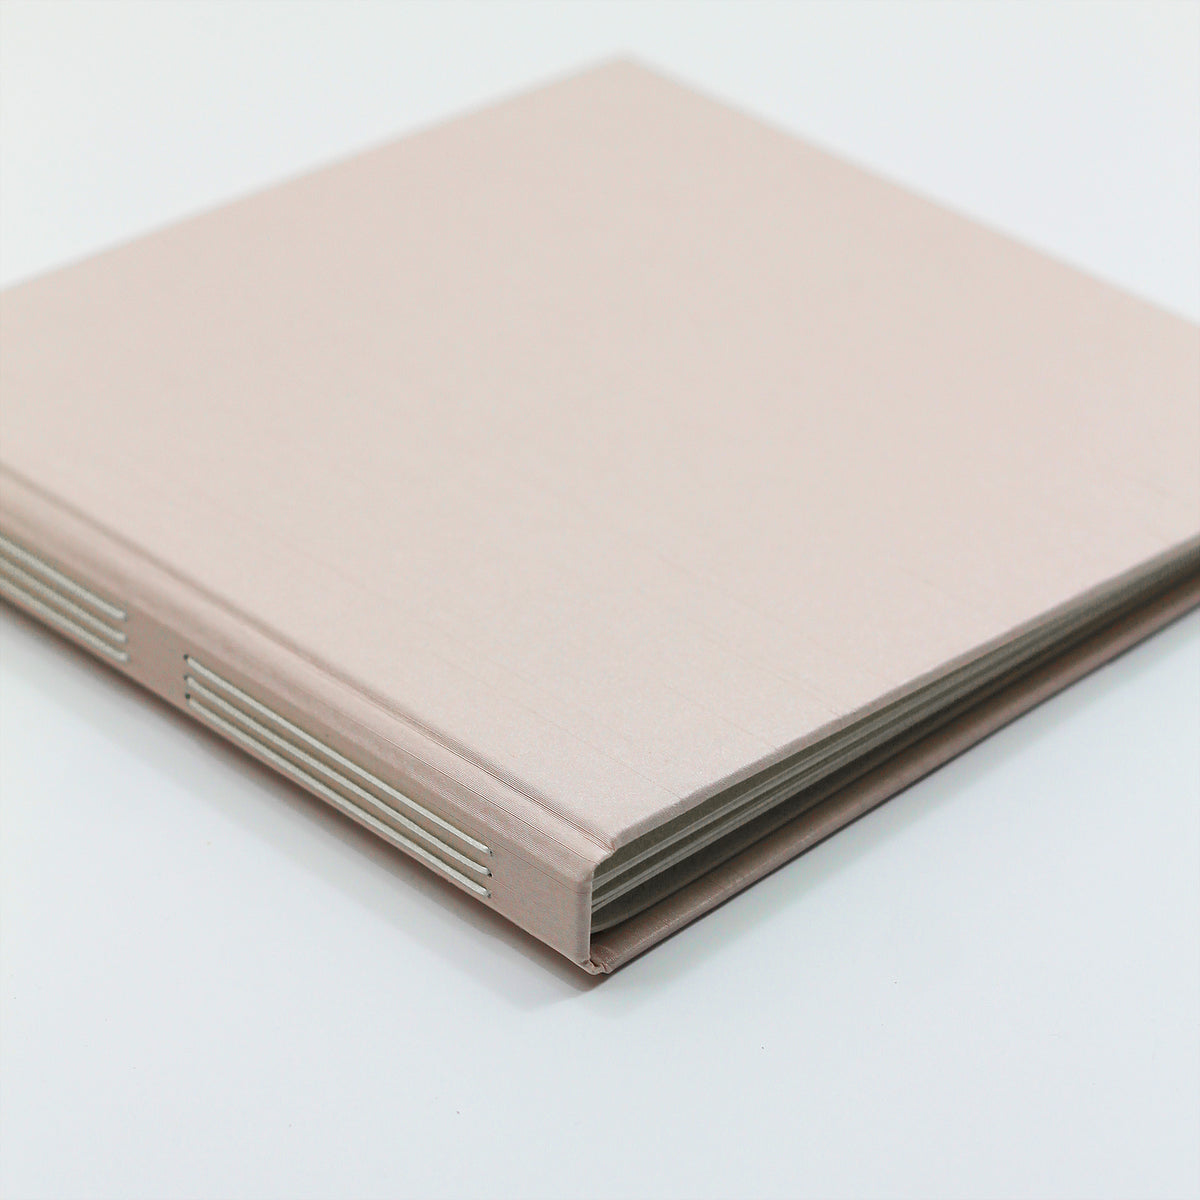 Event Guestbook Embossed with “Guests” | Cover: Blush Pink Silk | Available Personalized